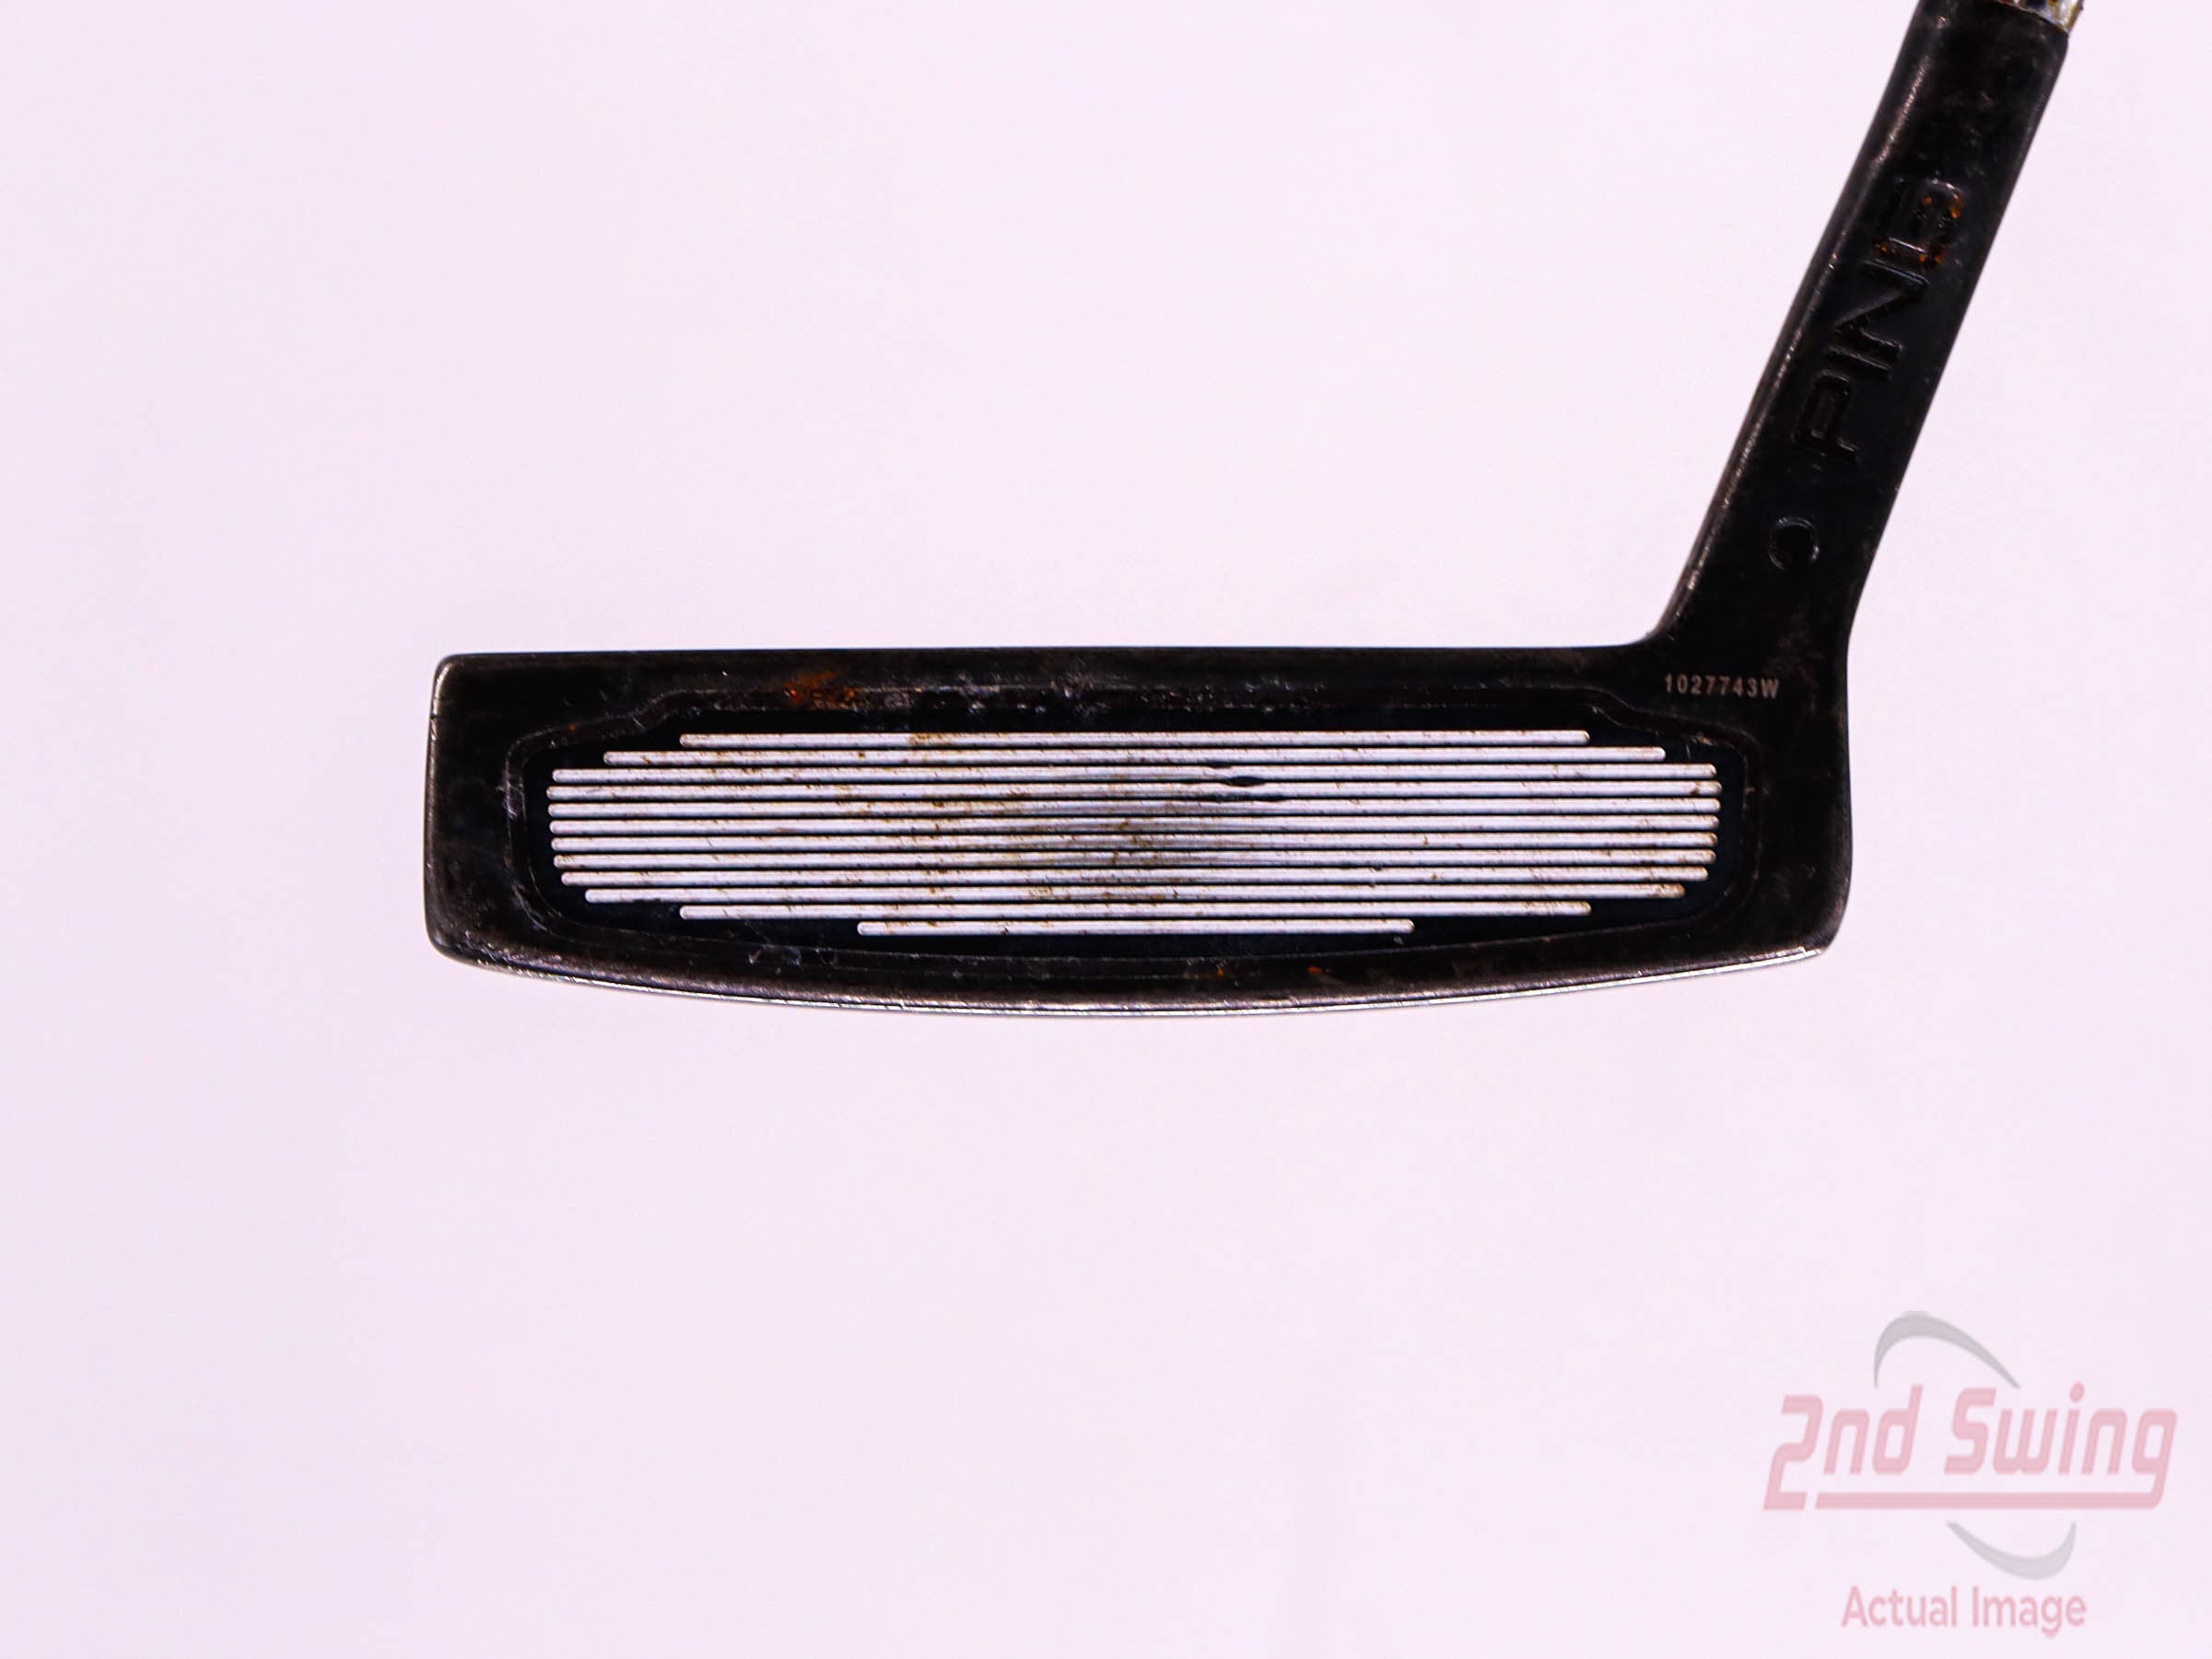 Ping Scottsdale TR Shea H Putter (D-22329529968)